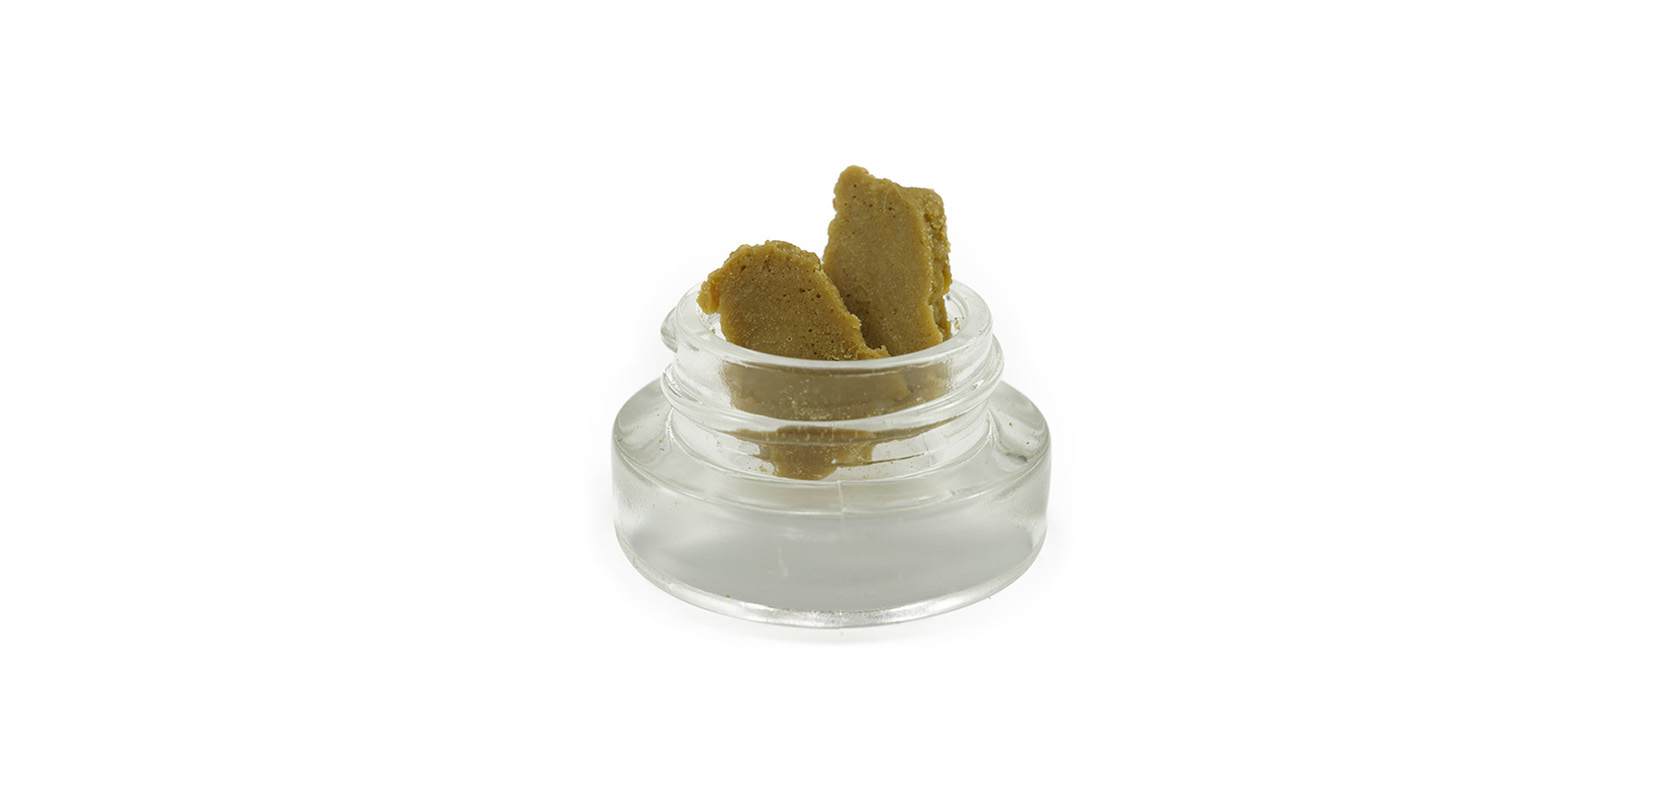 weed budder from wccannabis weed dispensary for cannabis concentrates in Canada. dab drug. dispensary to buy weed online.